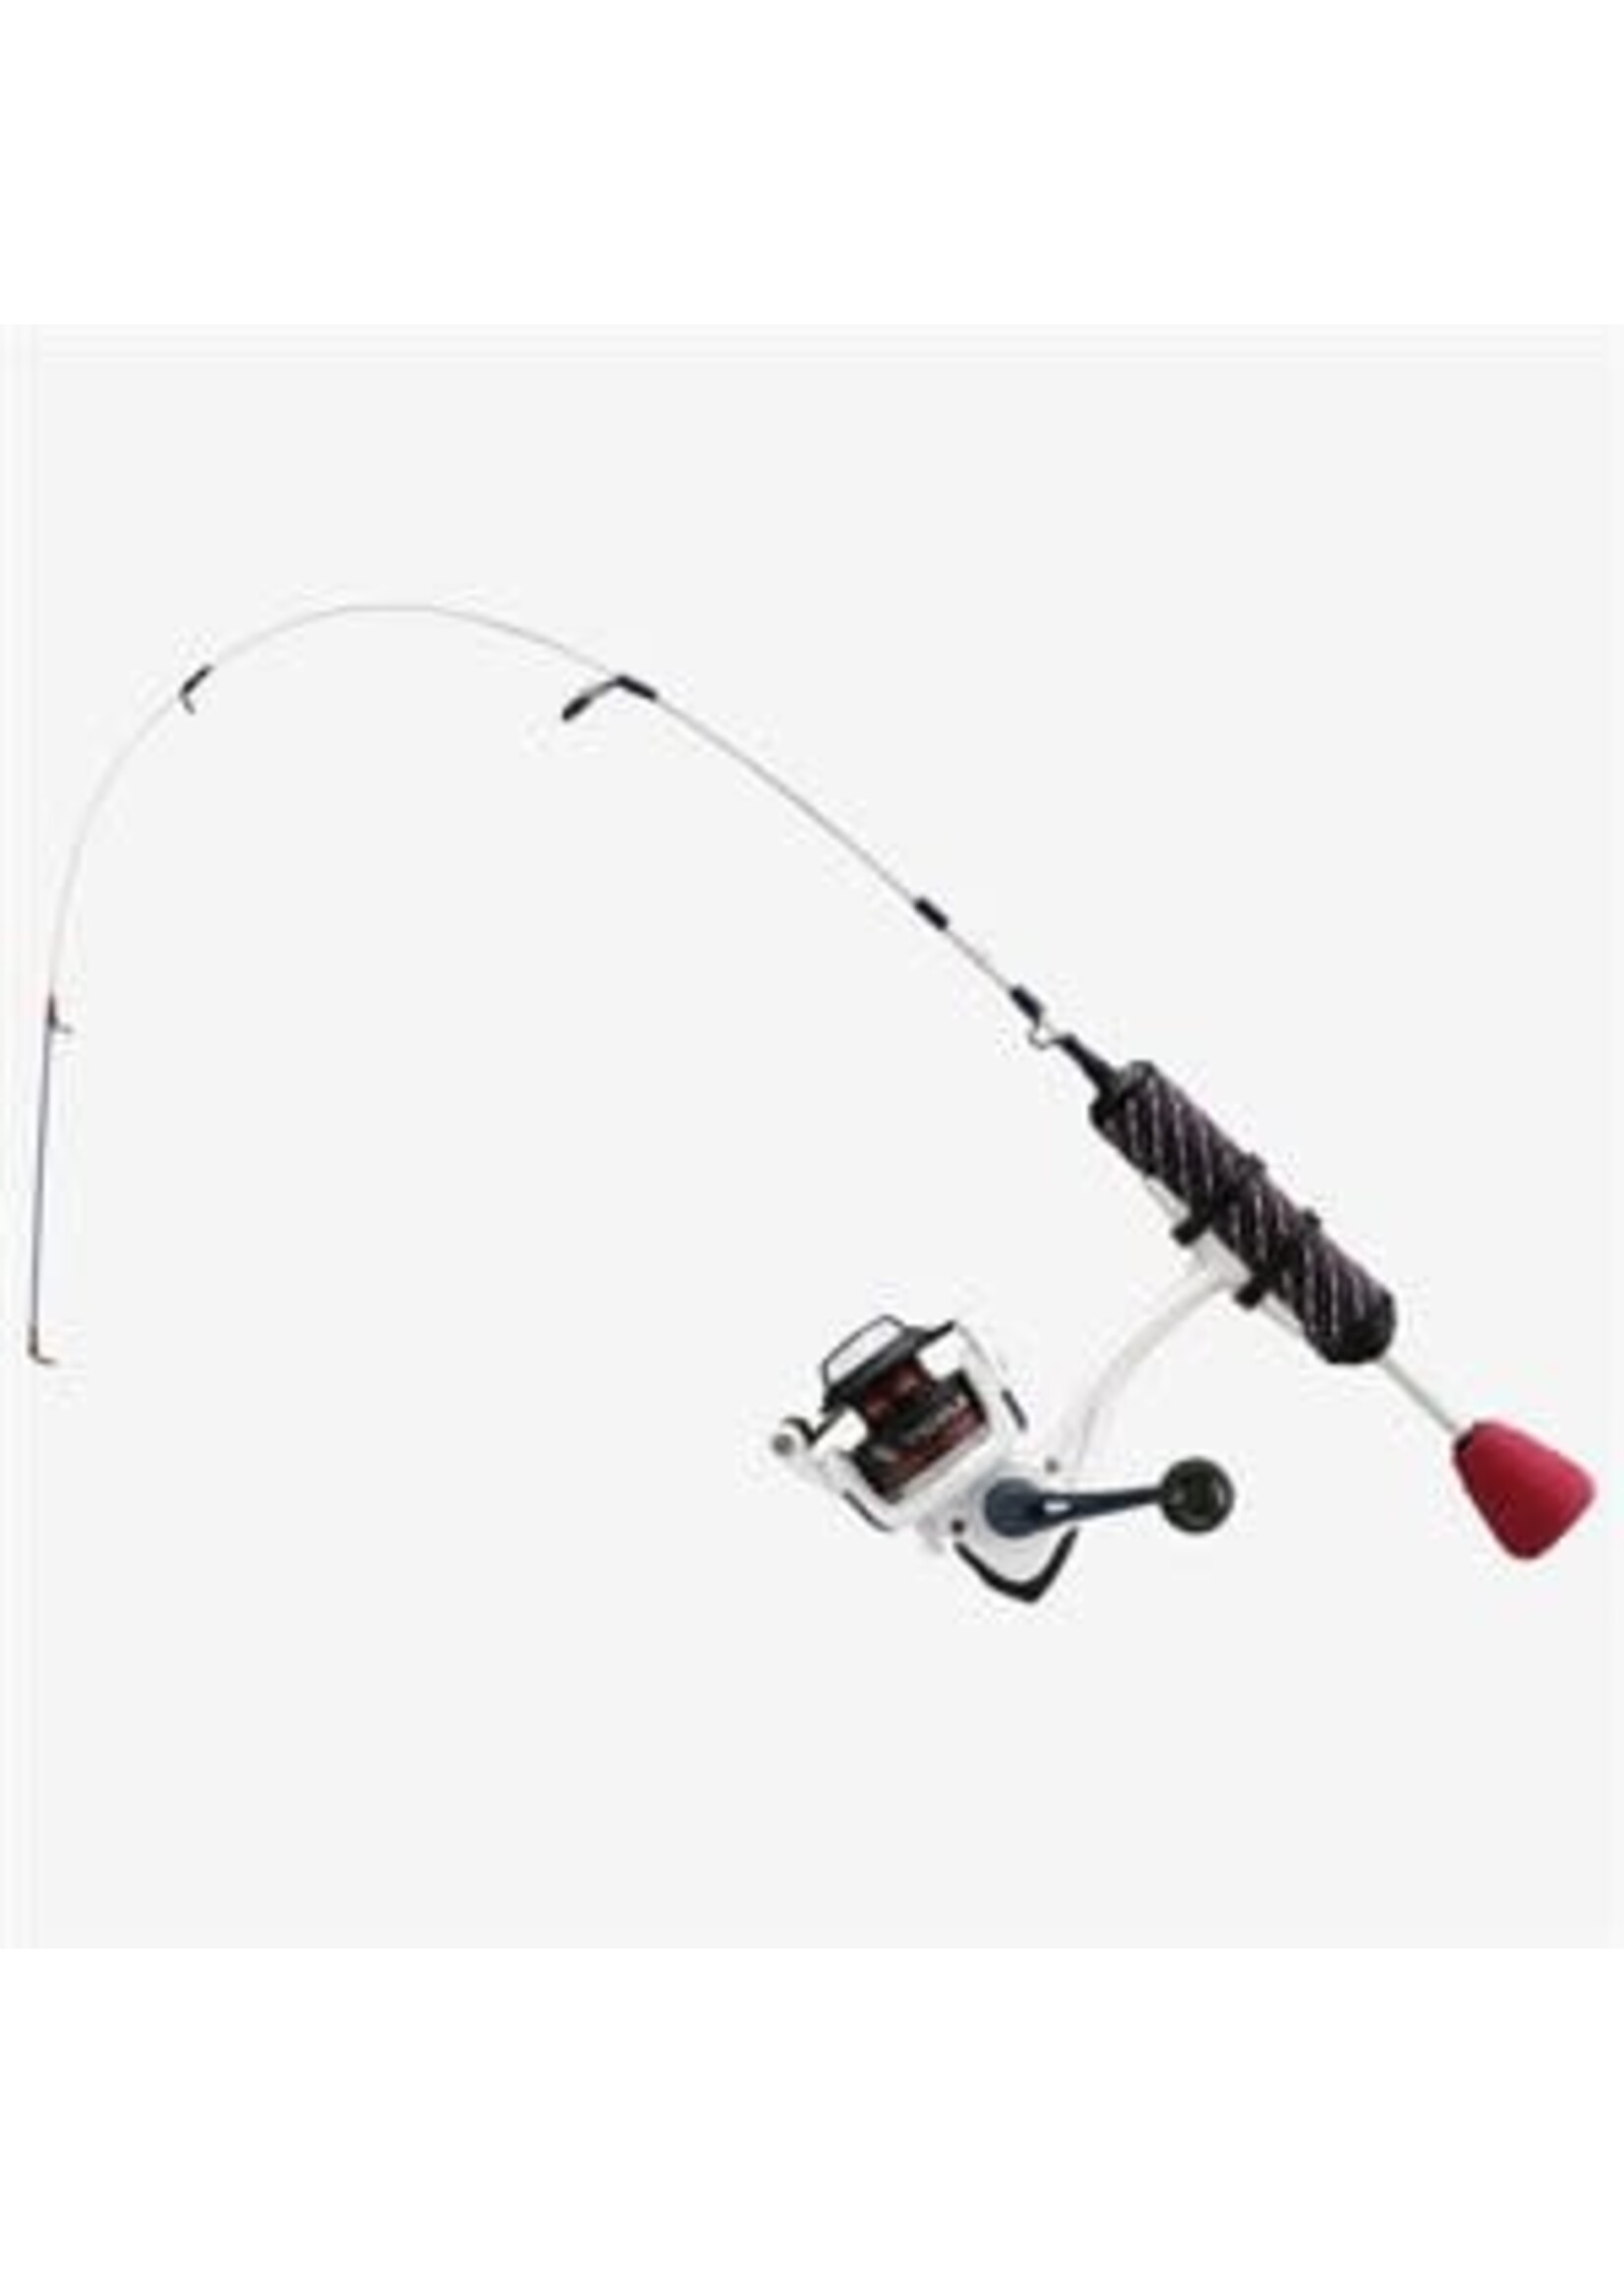 13 Fishing 13 Fishing Wicked Patriot Edition Spinning Combo